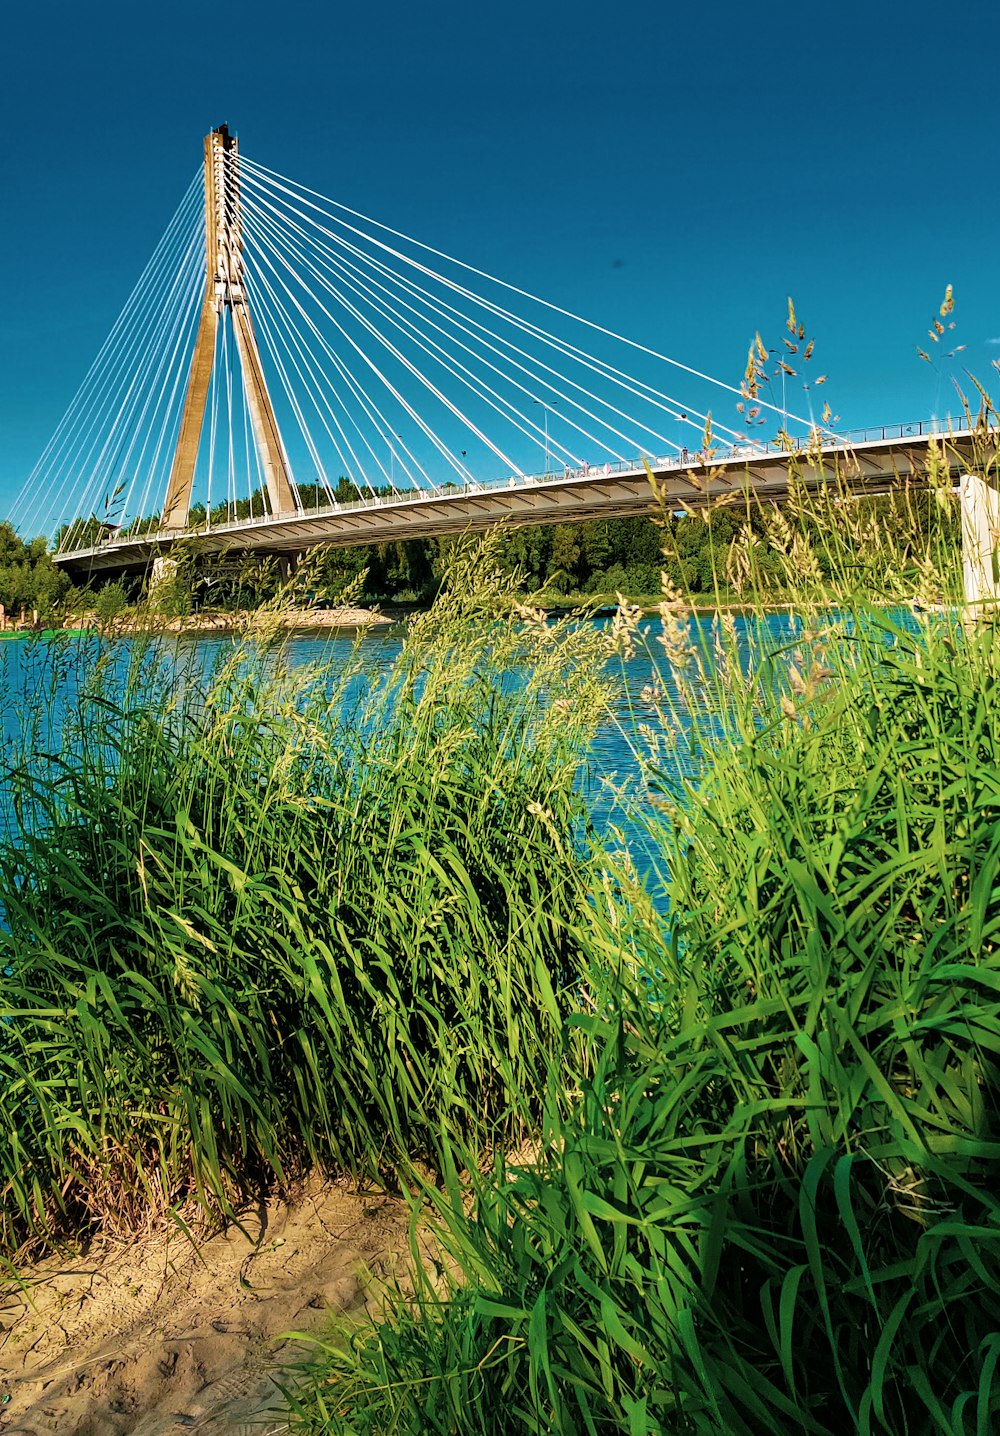 a bridge over a body of water surrounded by tall grass